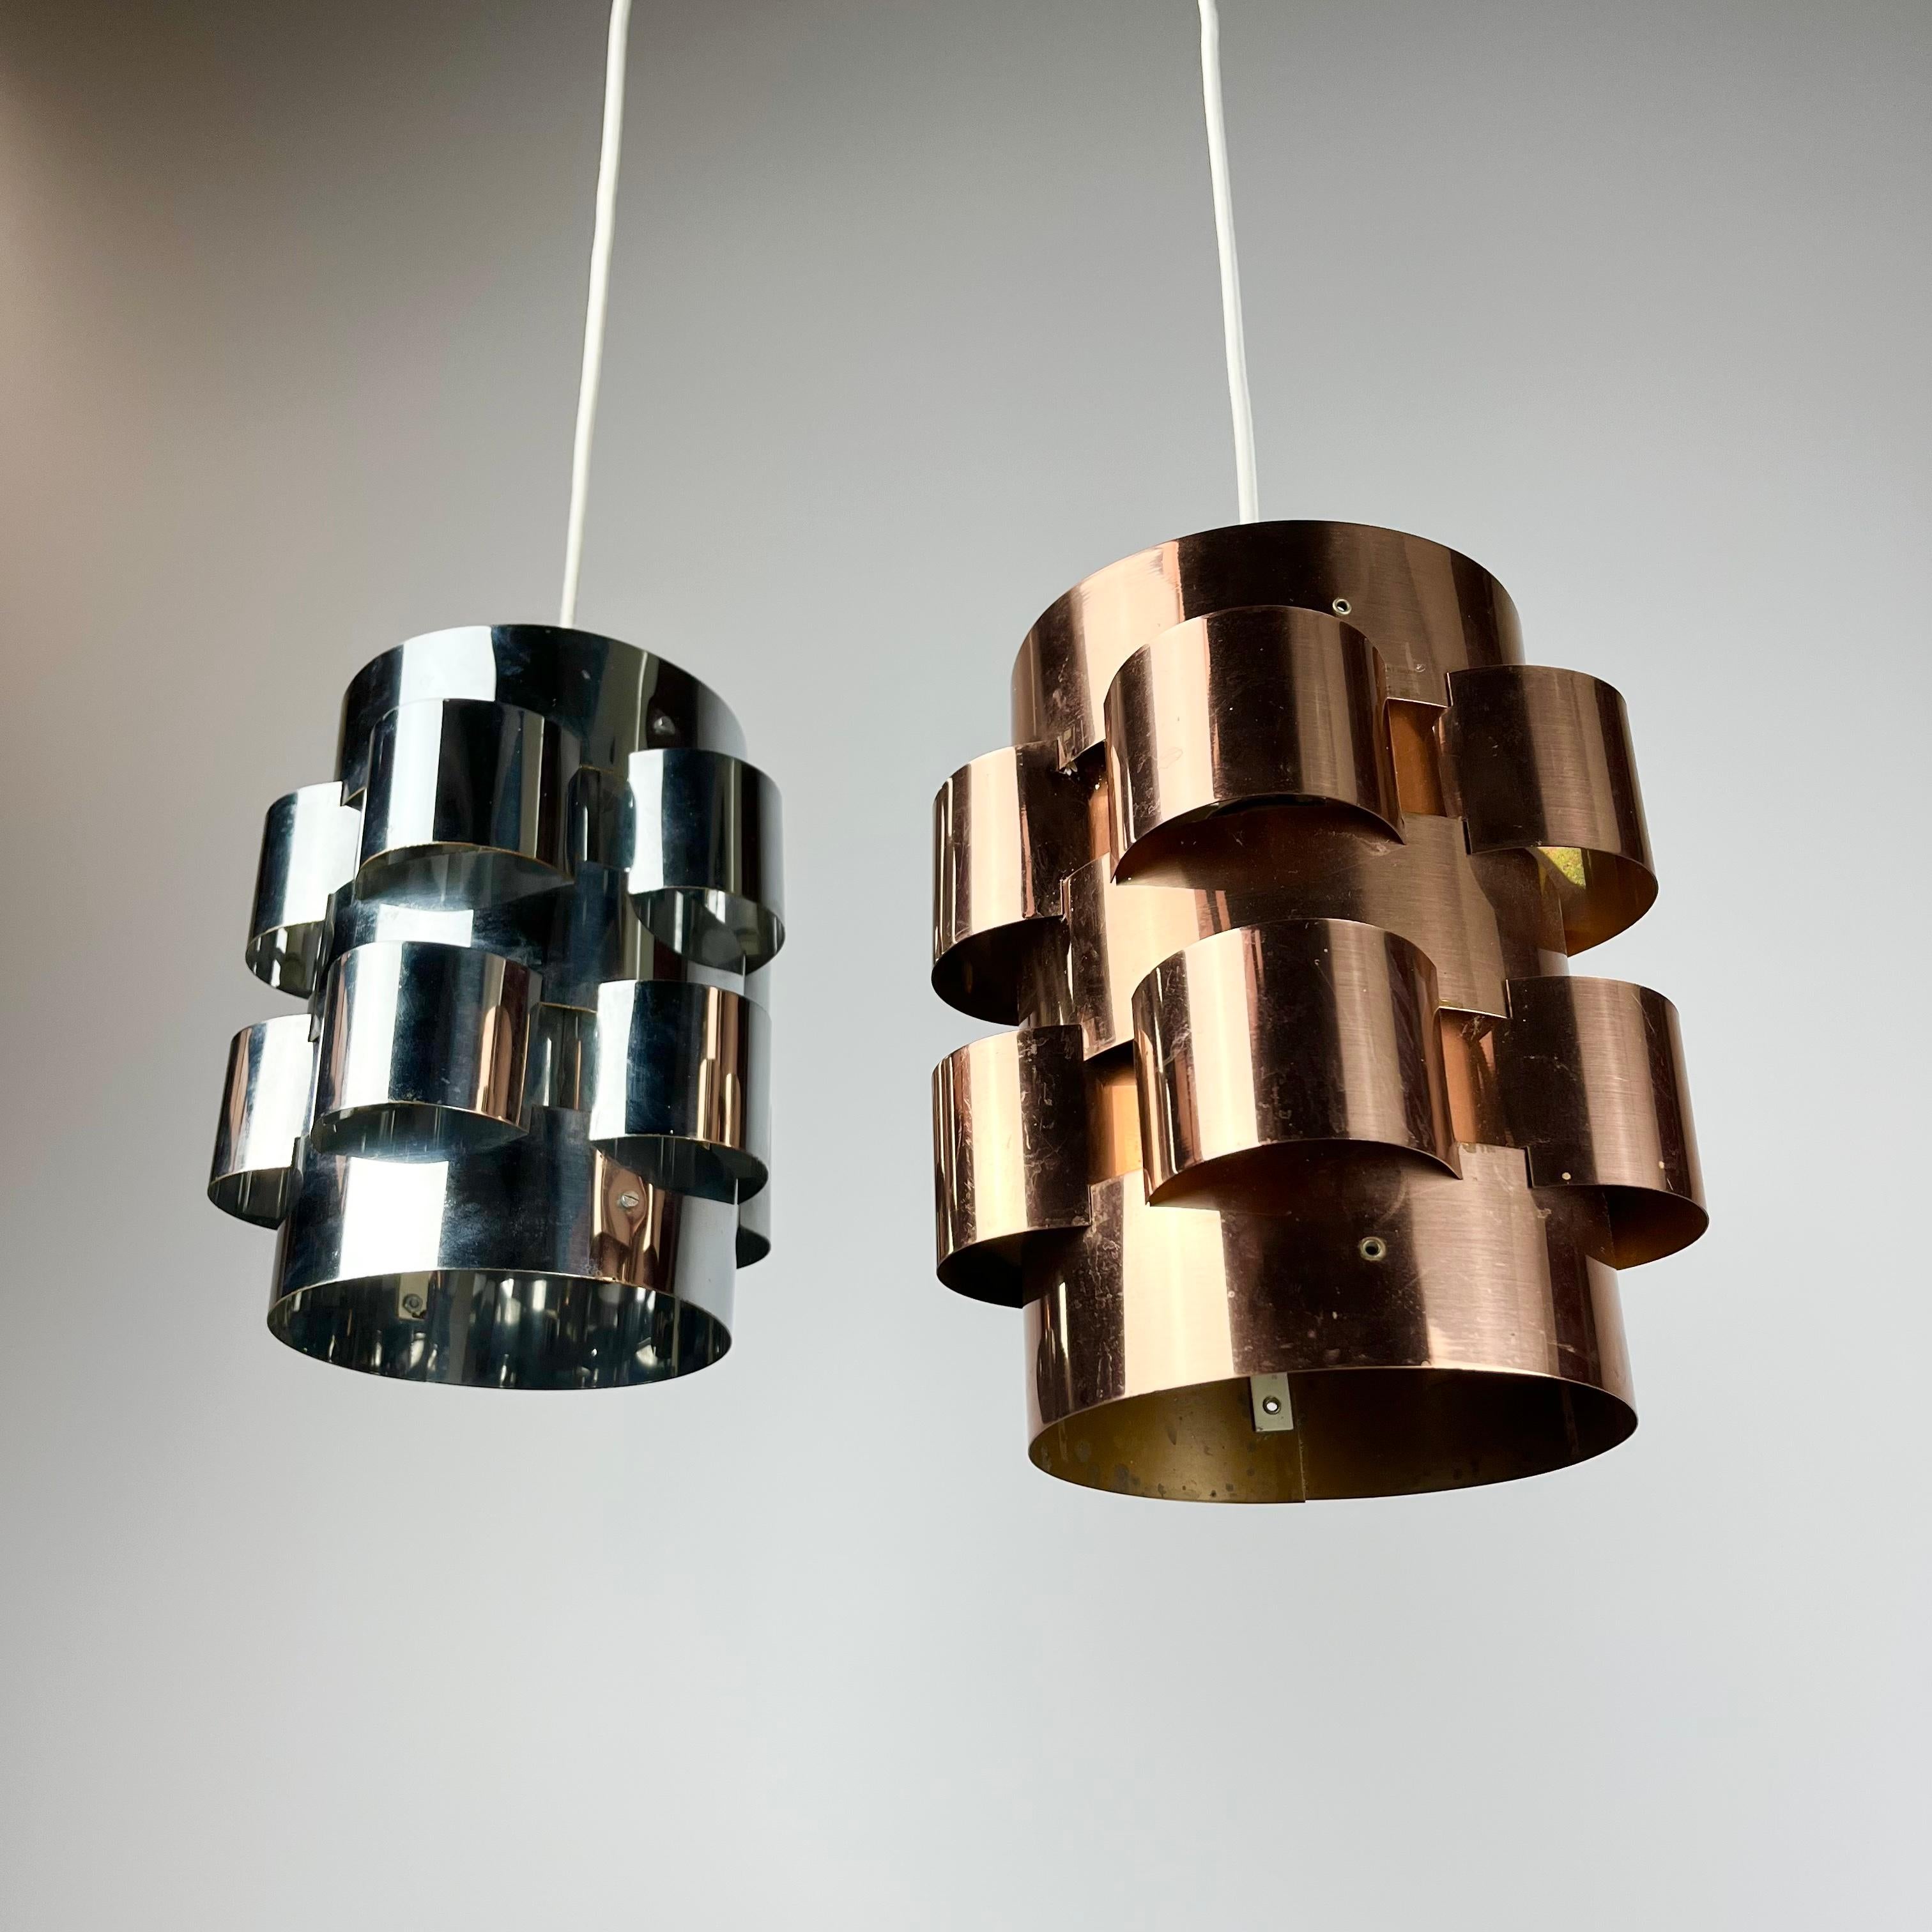 An ultra stylish pair of shiny metal light shades!
I believe these stunners were designed by Werner Schou and produced in Denmark by Coronell Elektro during the late 1960s to early 1970s, and are solidly constructed from heavy gauge chrome steel and